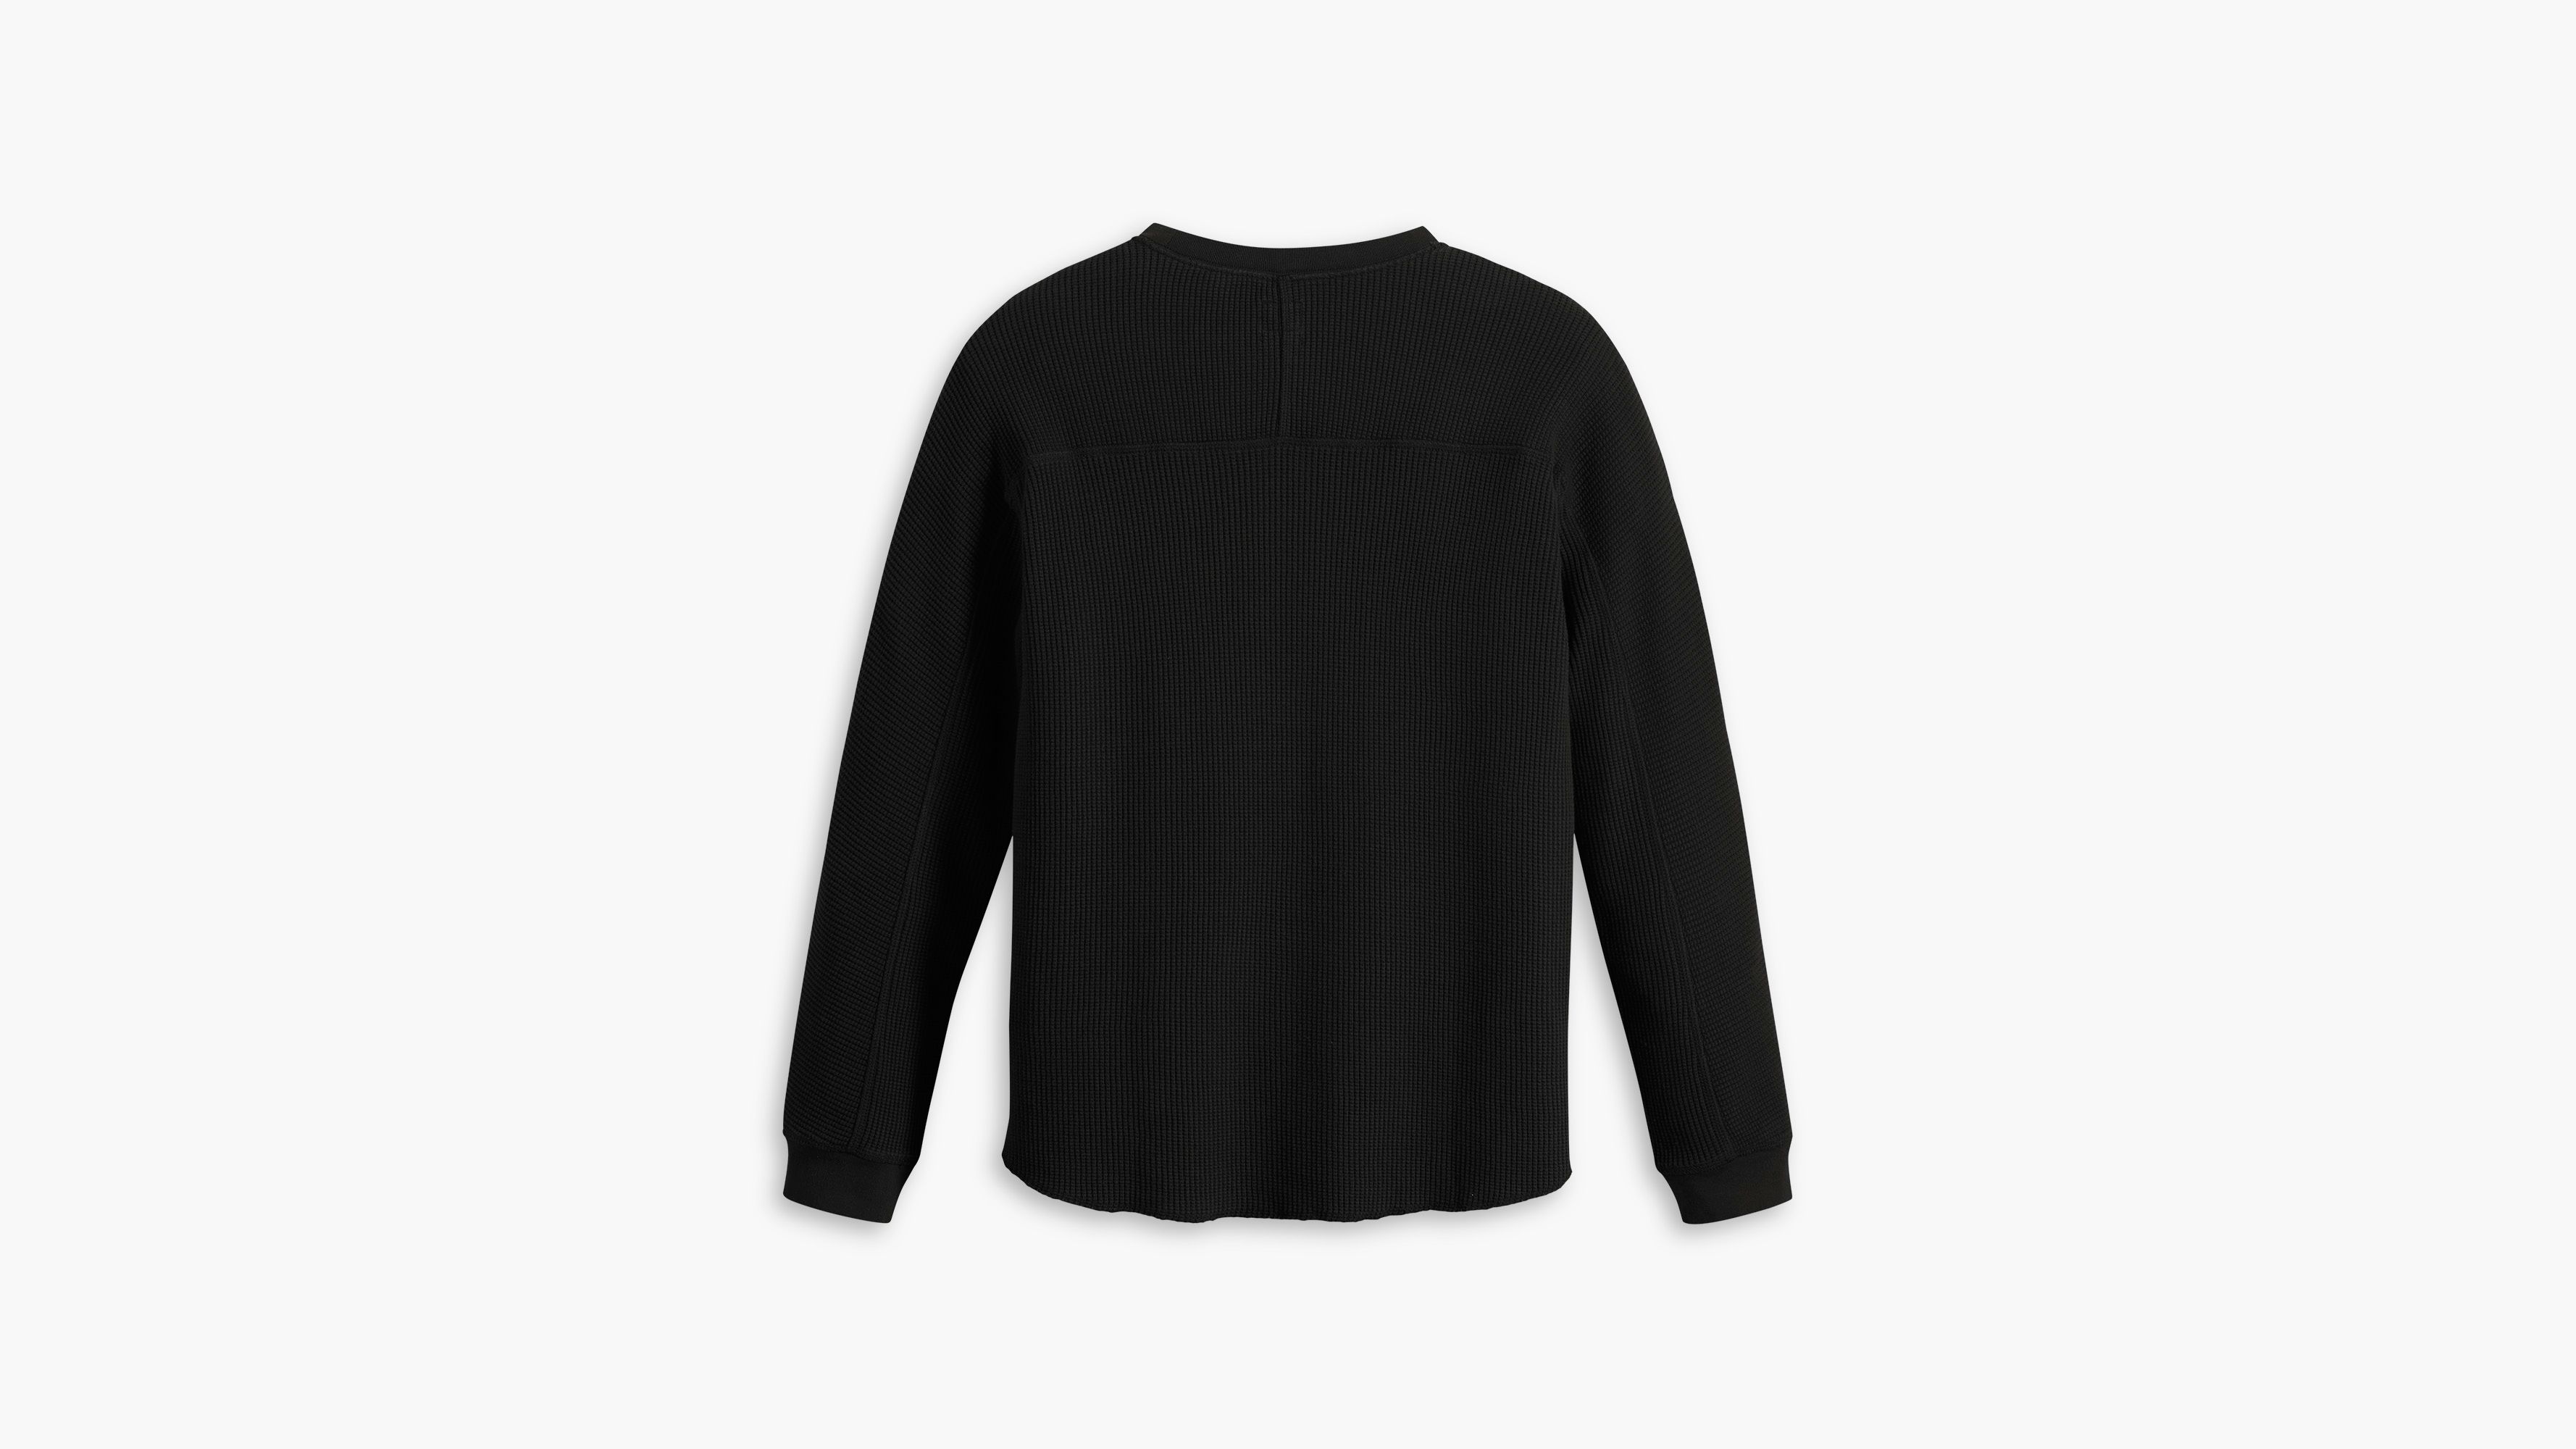 Long Sleeve Relaxed Fit Thermal Shirt